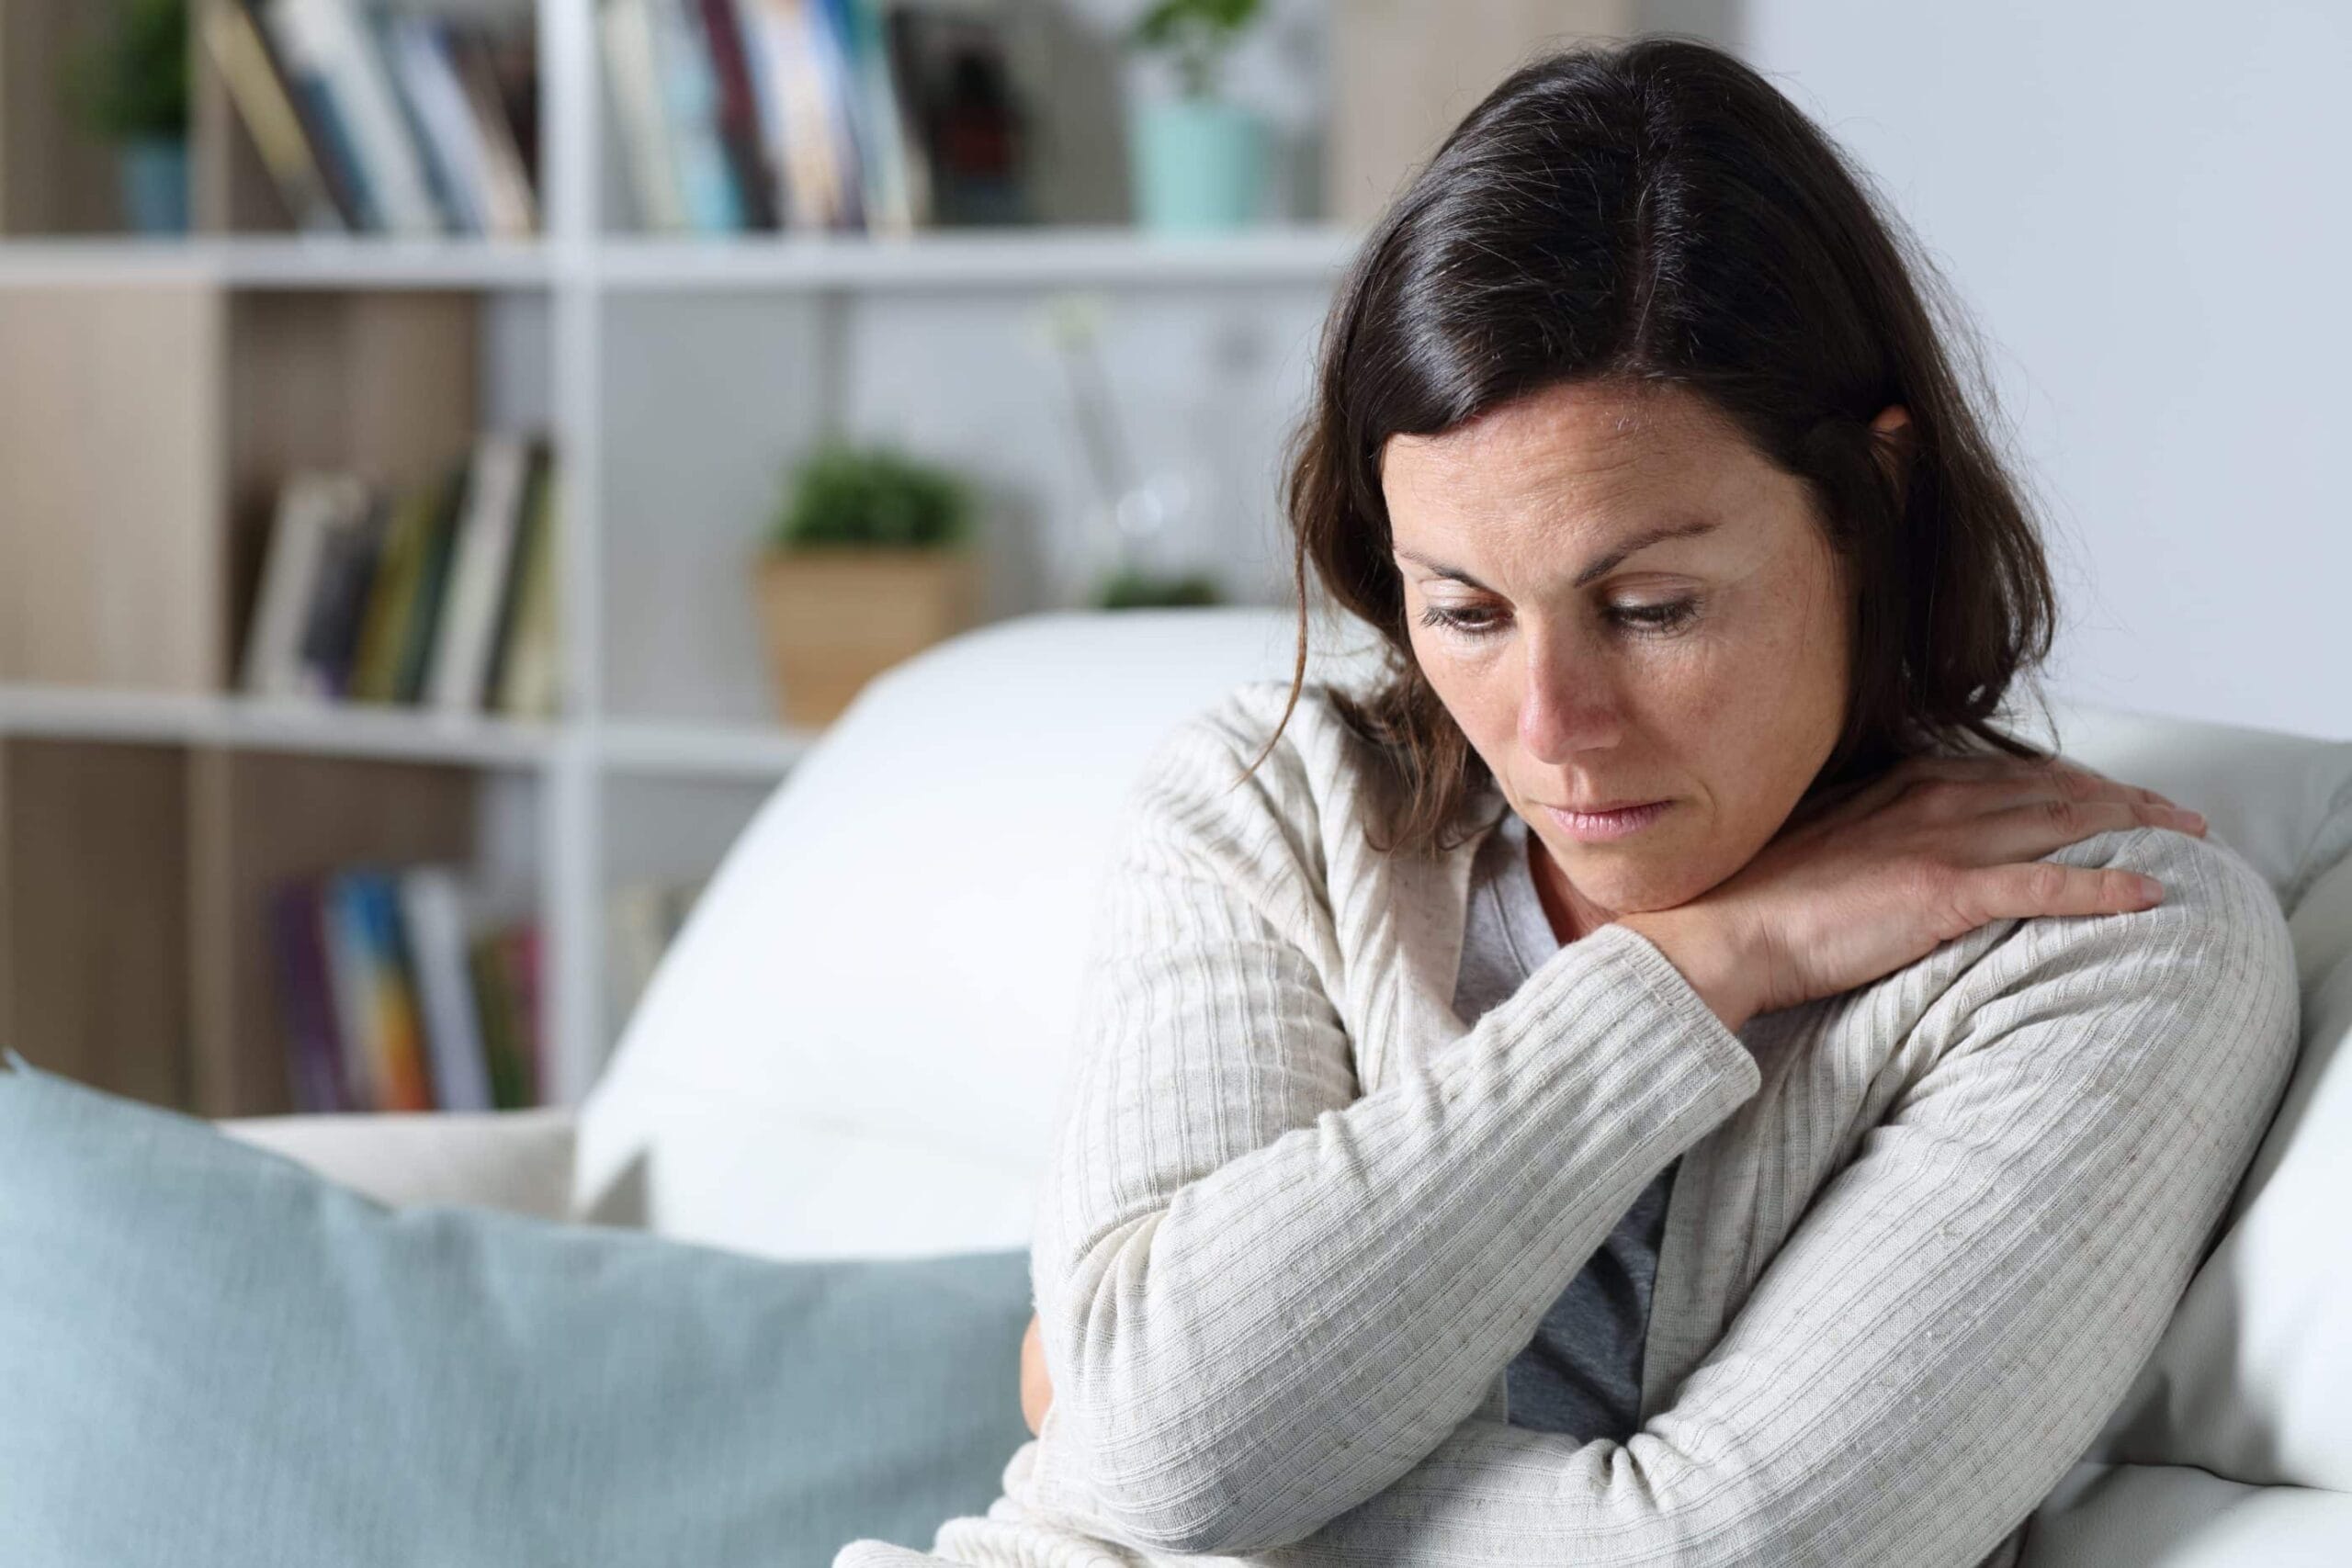 Woman struggling with symptoms of severe depression